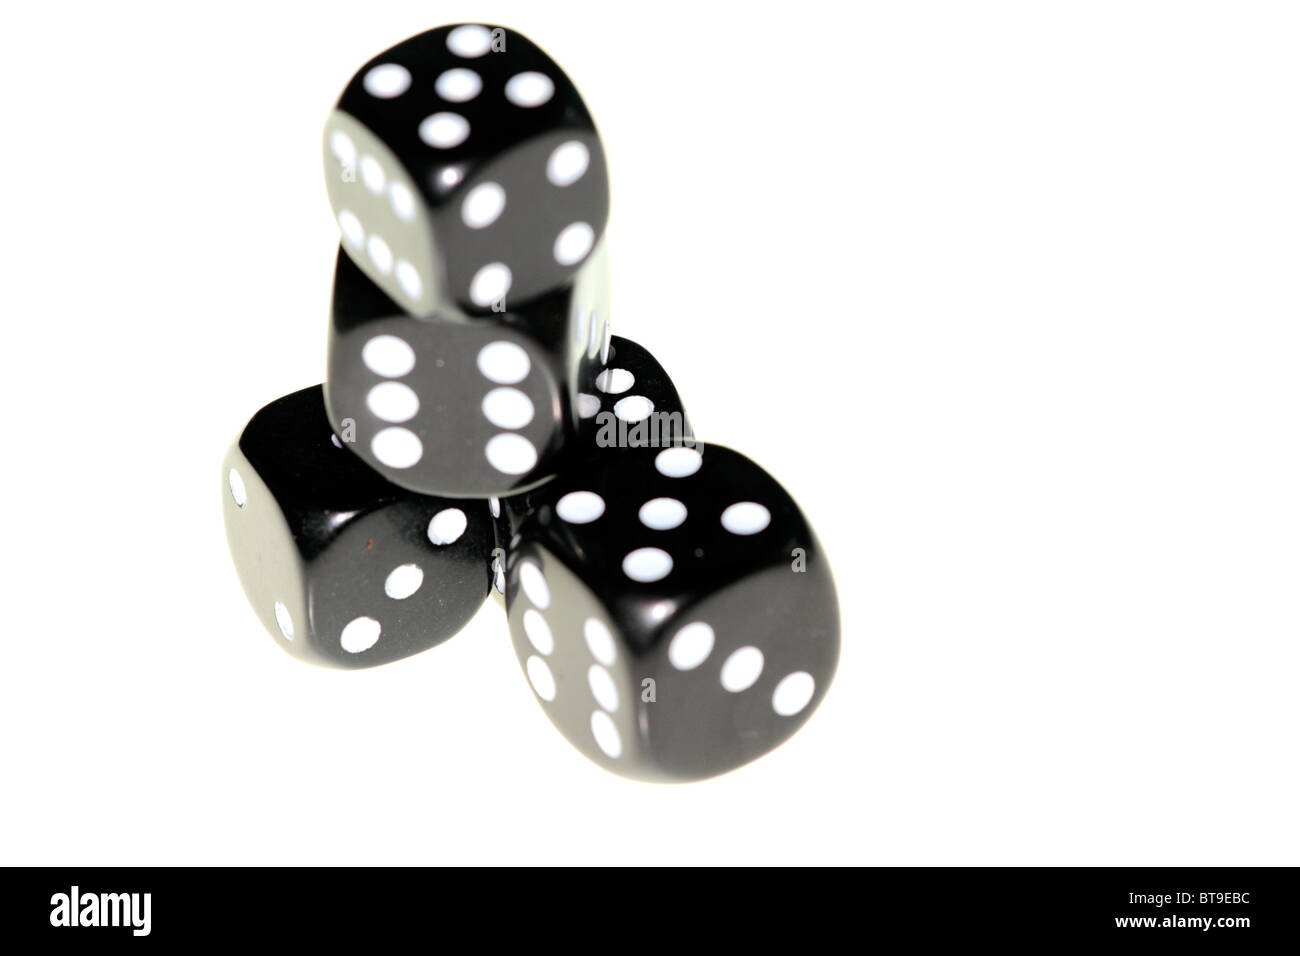 A number of black dice roughly stacked on a white background Stock Photo